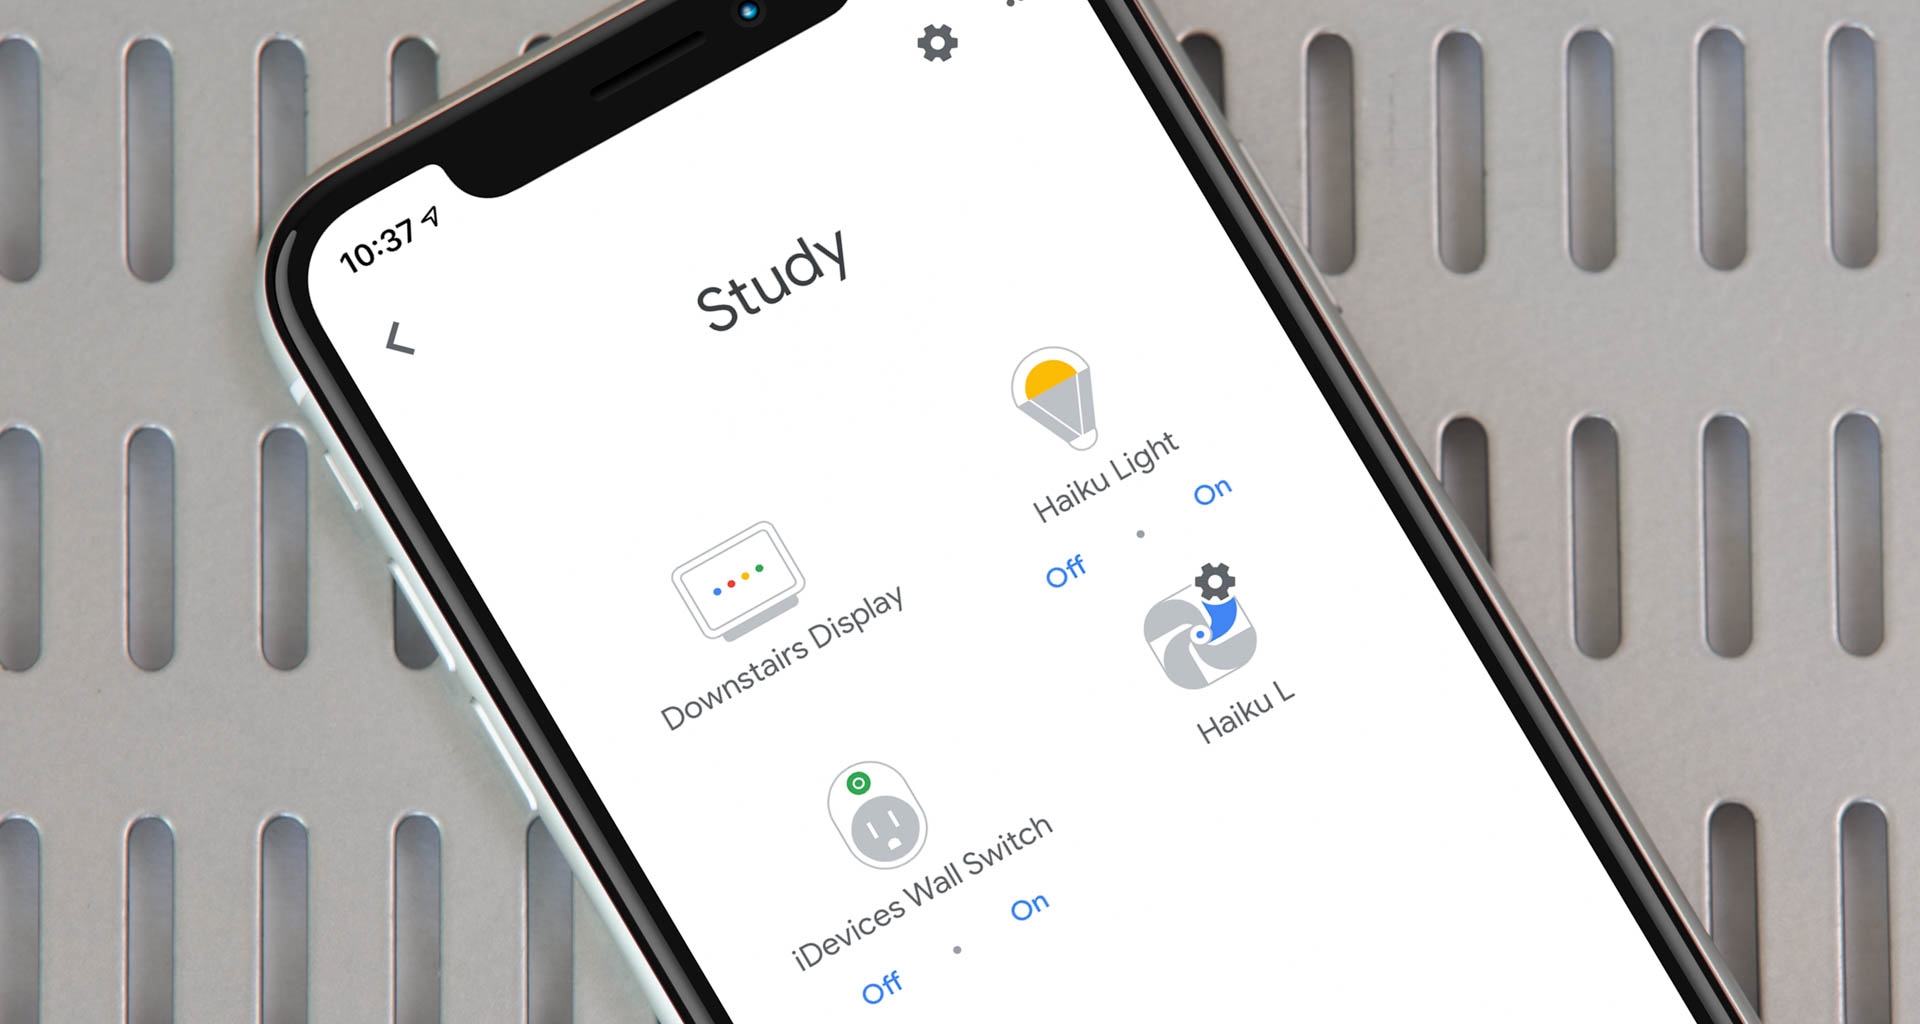 A benefit of recent upgrades to the Google Home app, directly controllable devices appear as icons on the Home screen. Here, a Haiku Light and Haiku L fan are visible. Image: Digitized House Media.